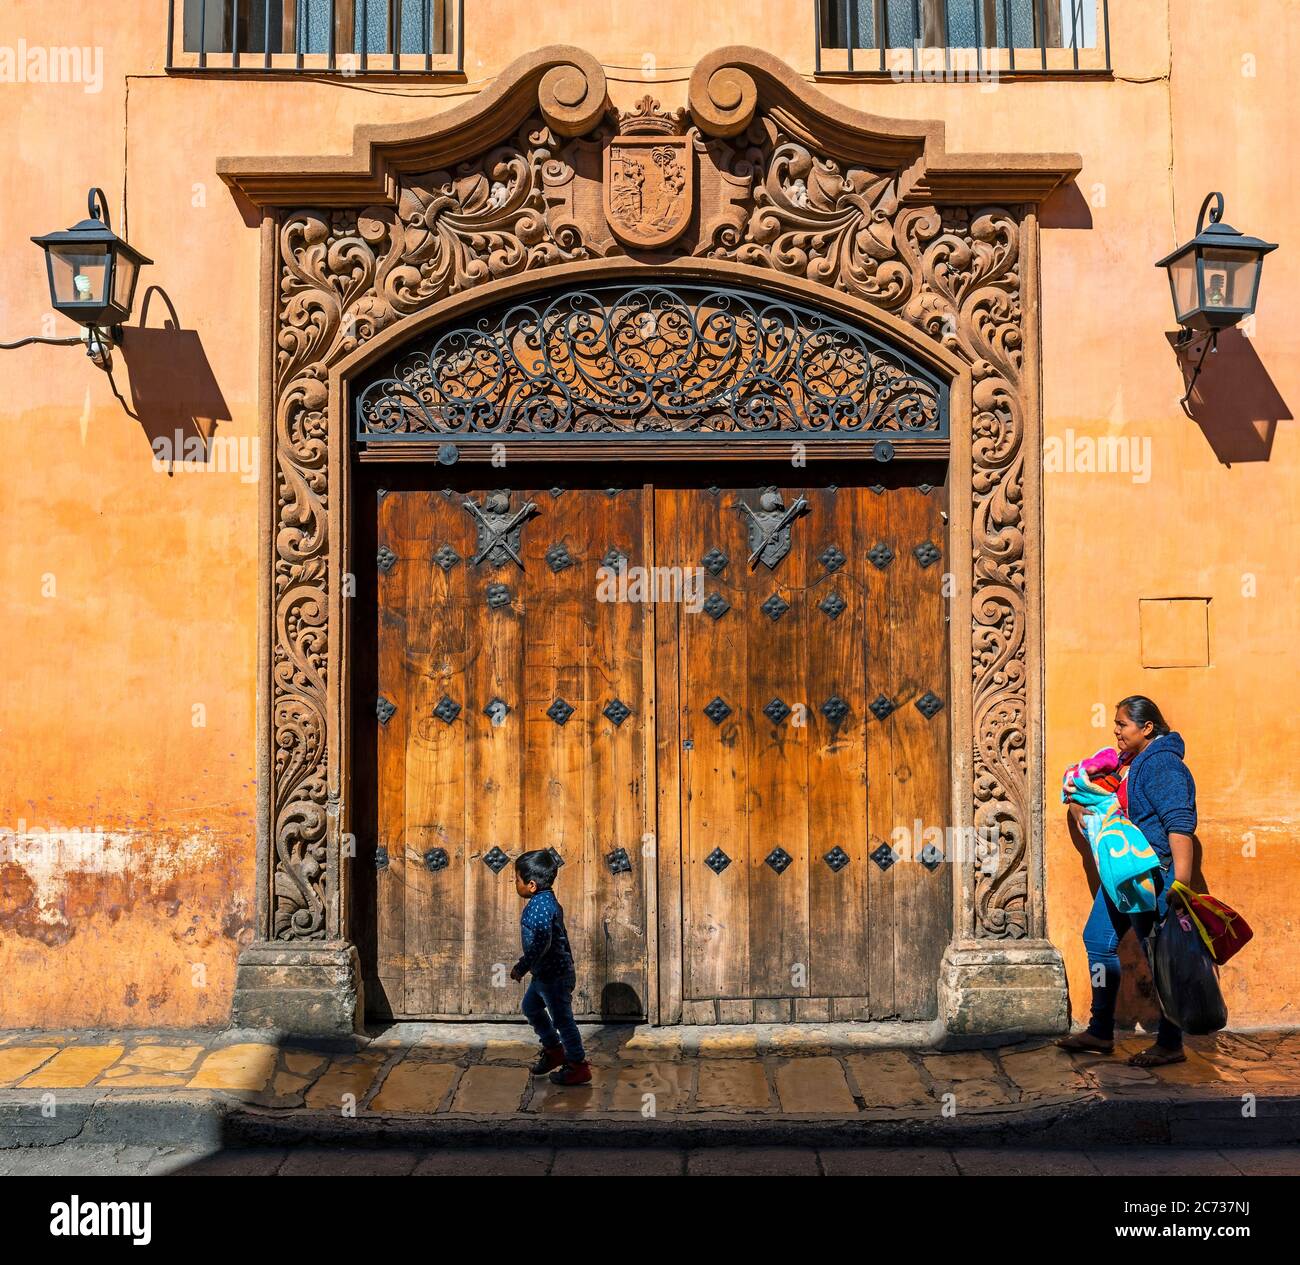 Indigenous mexican maya woman walking by a decorated door in colonial style architecture with her children, San Cristobal de las Casas, Mexico Stock Photo